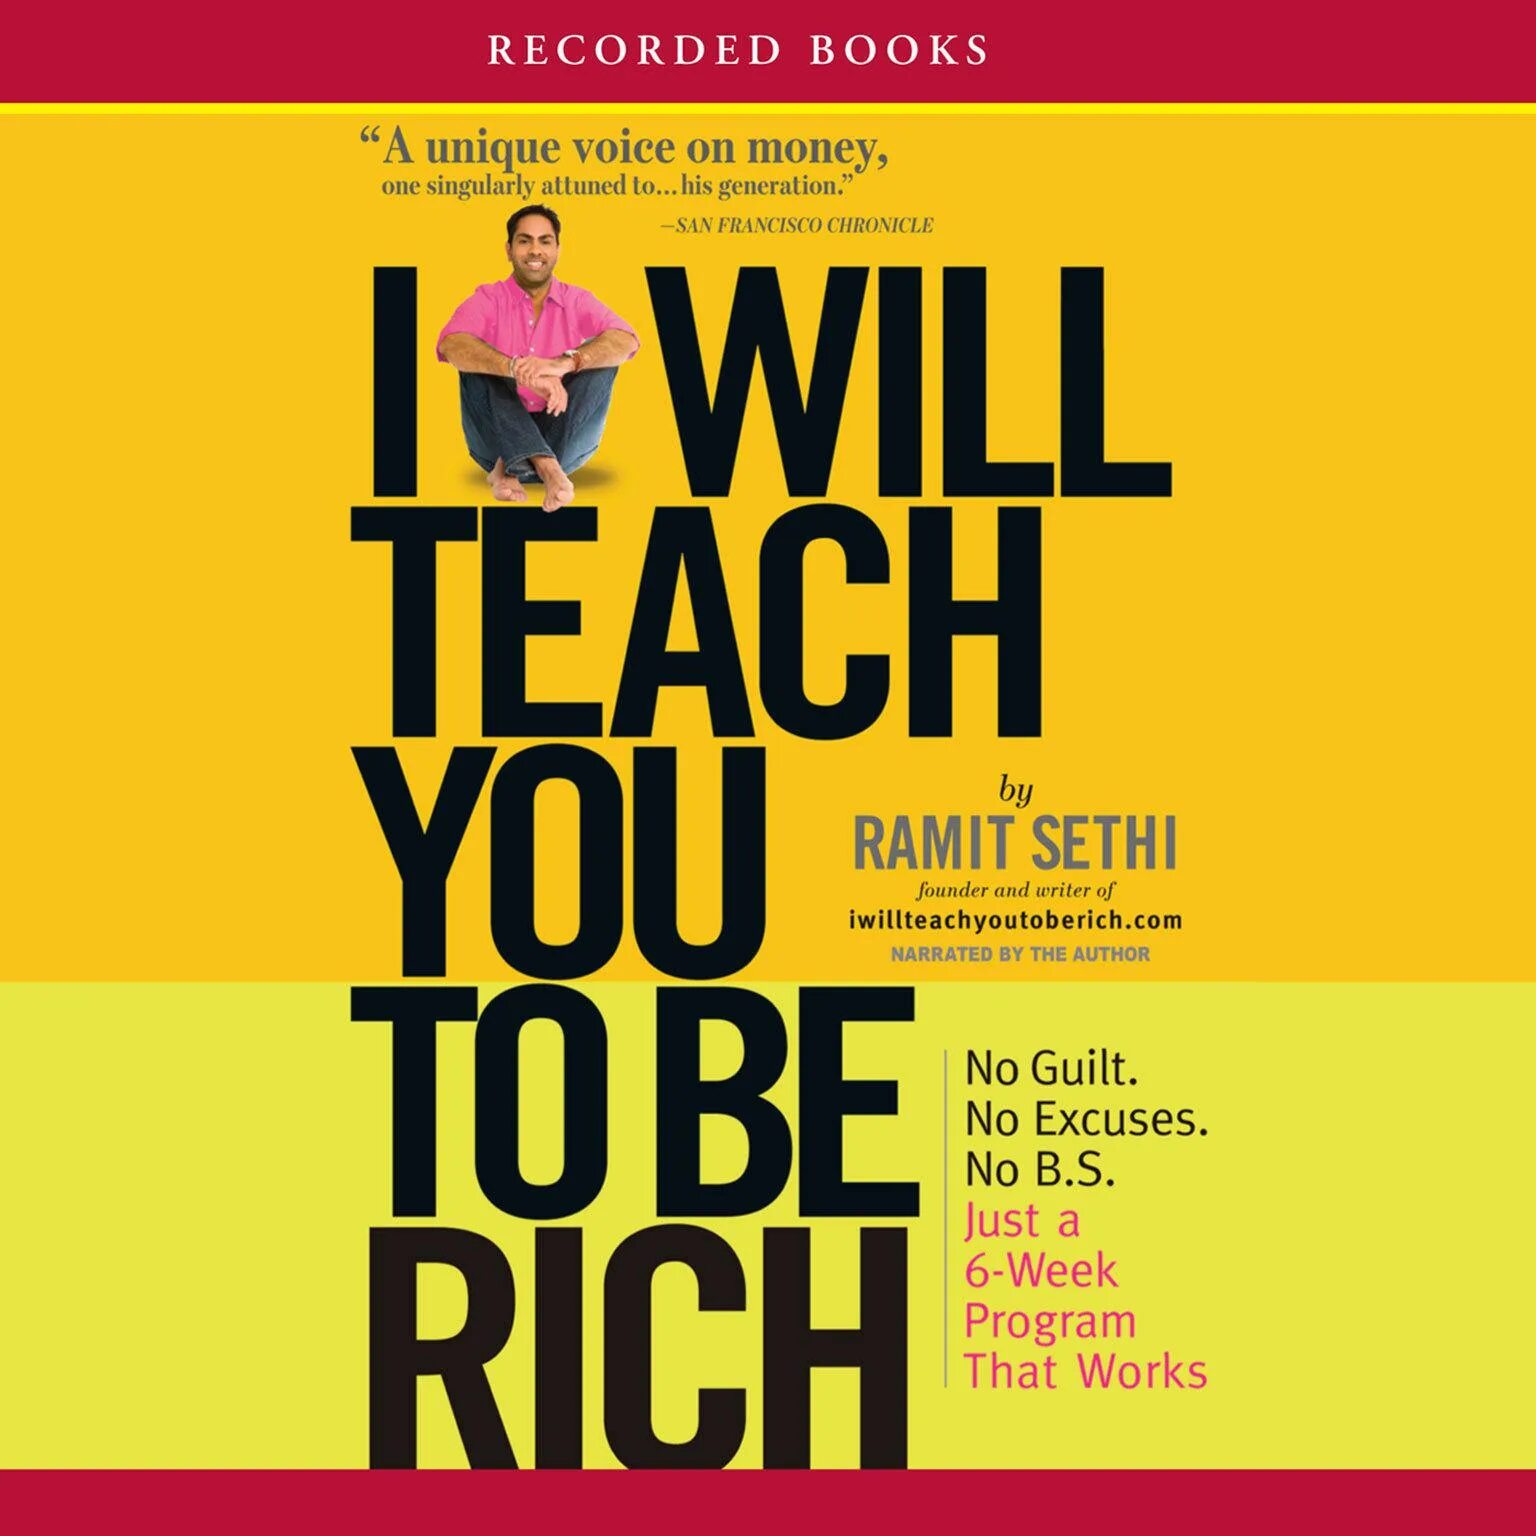 “I will teach you to be Rich” by Ramit Sethi. Will i be Rich. Be Rich. I will teach you. Be rich перевод